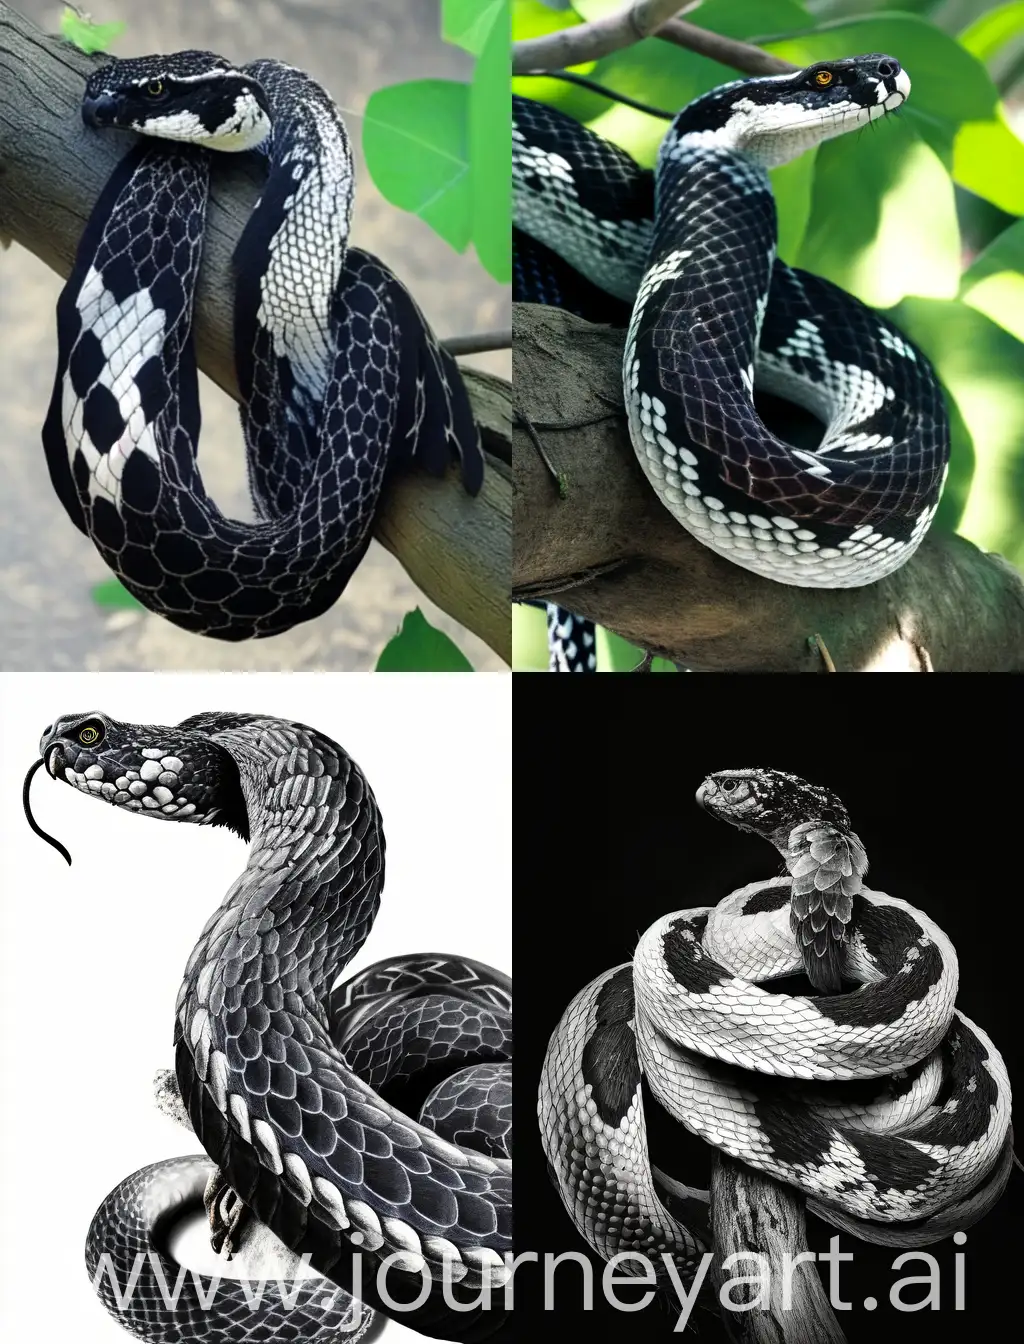 A feathered snake is resting on a branch, feathered snake has a head of a snake, a crest of feathers and a mane of feathers, it has two arms but no legs, it has long and clawed fingers on its hands, it is colored black with white markings, it has jet black scales on its body, it has a long tail which is loosely coupled around a branch, around it is a shady jungle, its eyes have lids, its eyes are cat-like in shape, its eyes are half-closed and crimson in color, its posture is relaxed, its complexion is graceful and slender, its body in long and slender, its tail ends with a feather tassel